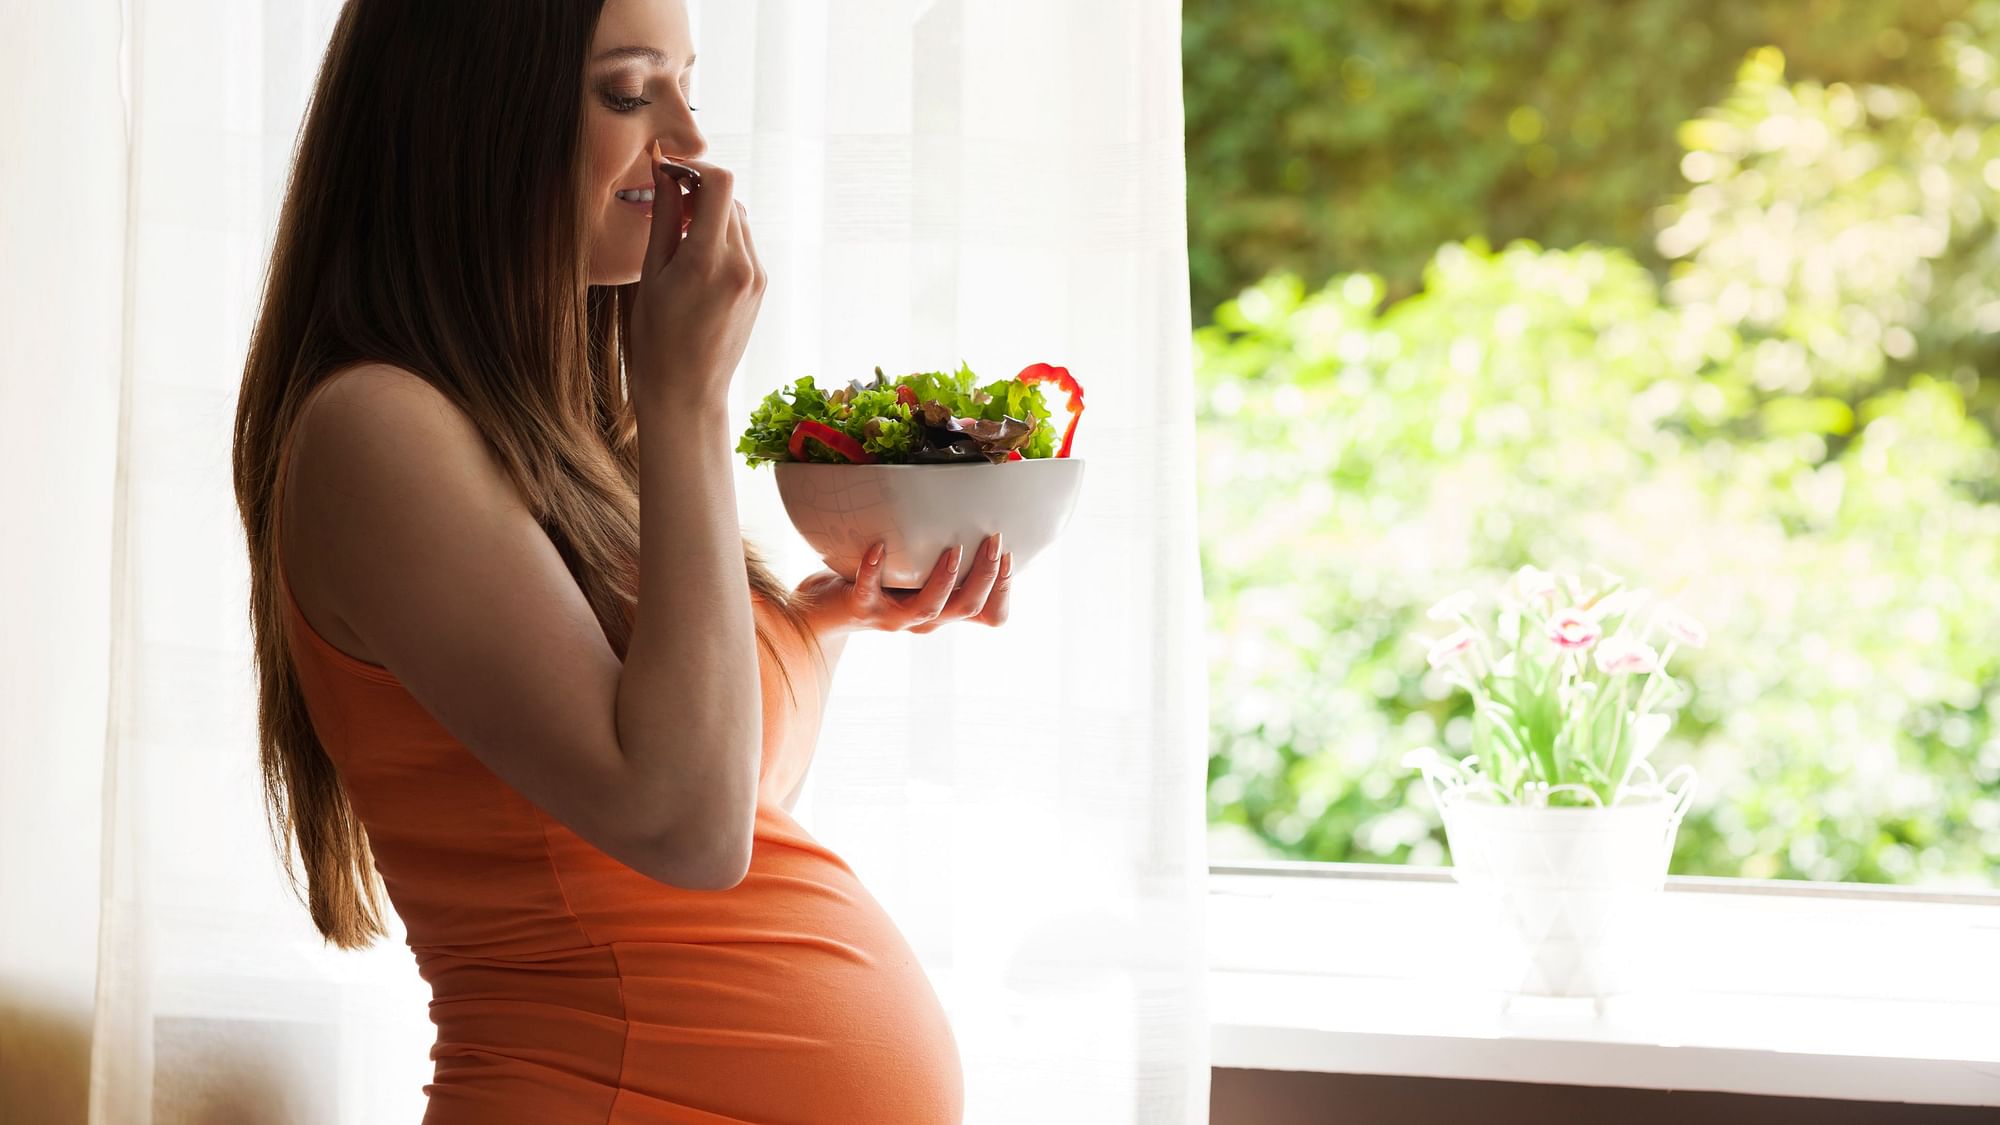 Food deprivation during early foetal life affects how long the future ovaries function.